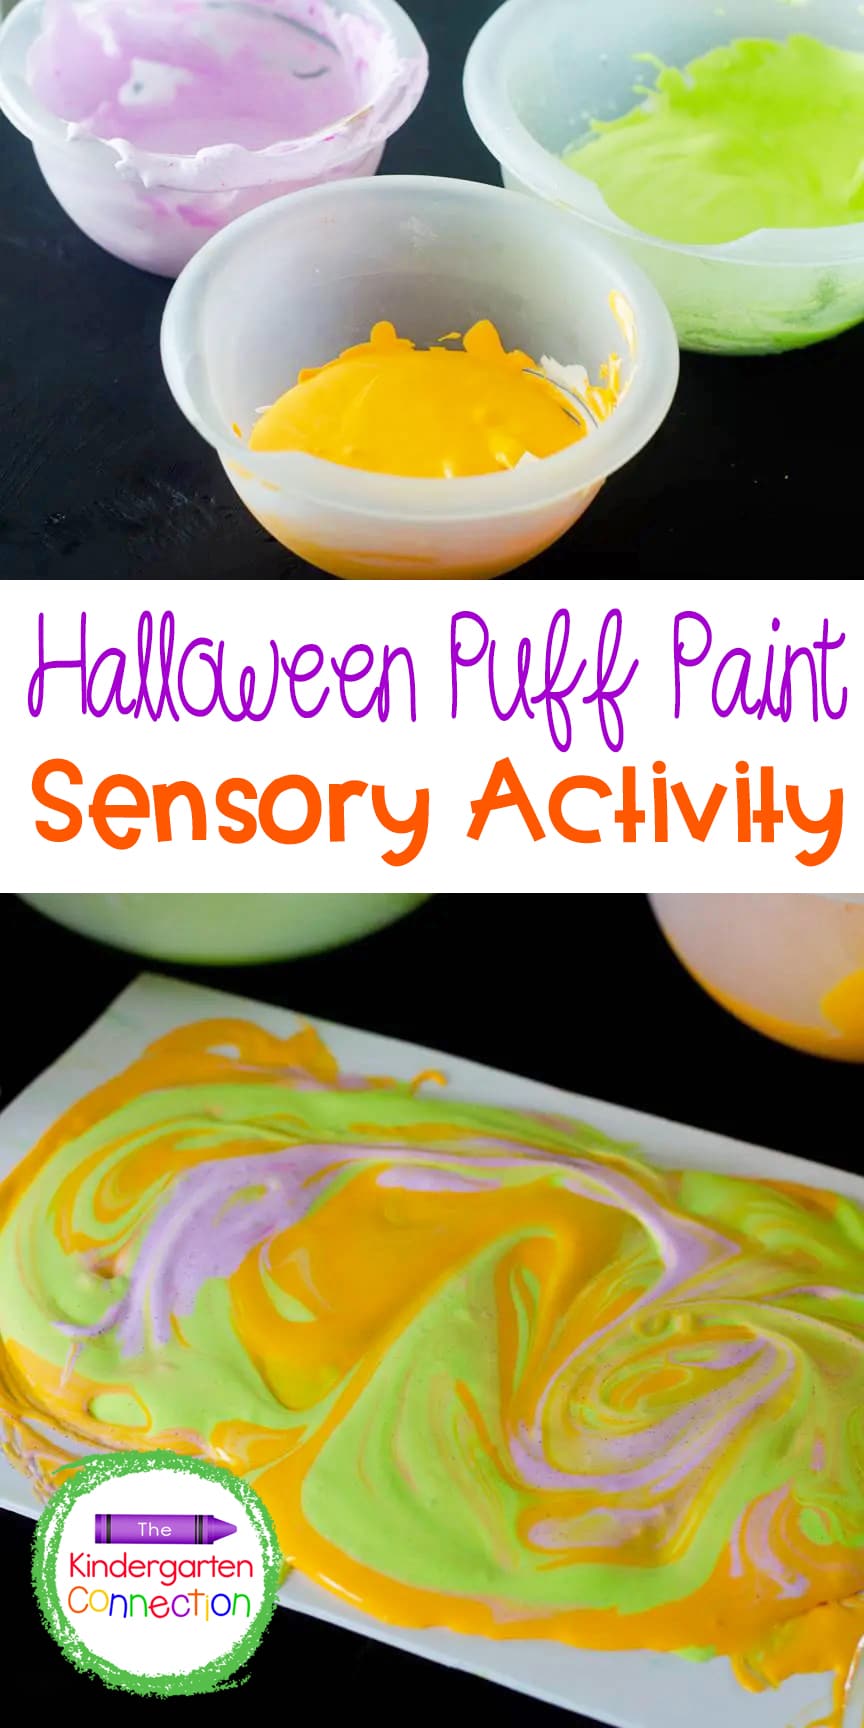 Easy to make and oh so fun to paint with, this Halloween puff paint recipe is the perfect Halloween sensory activity for kids!